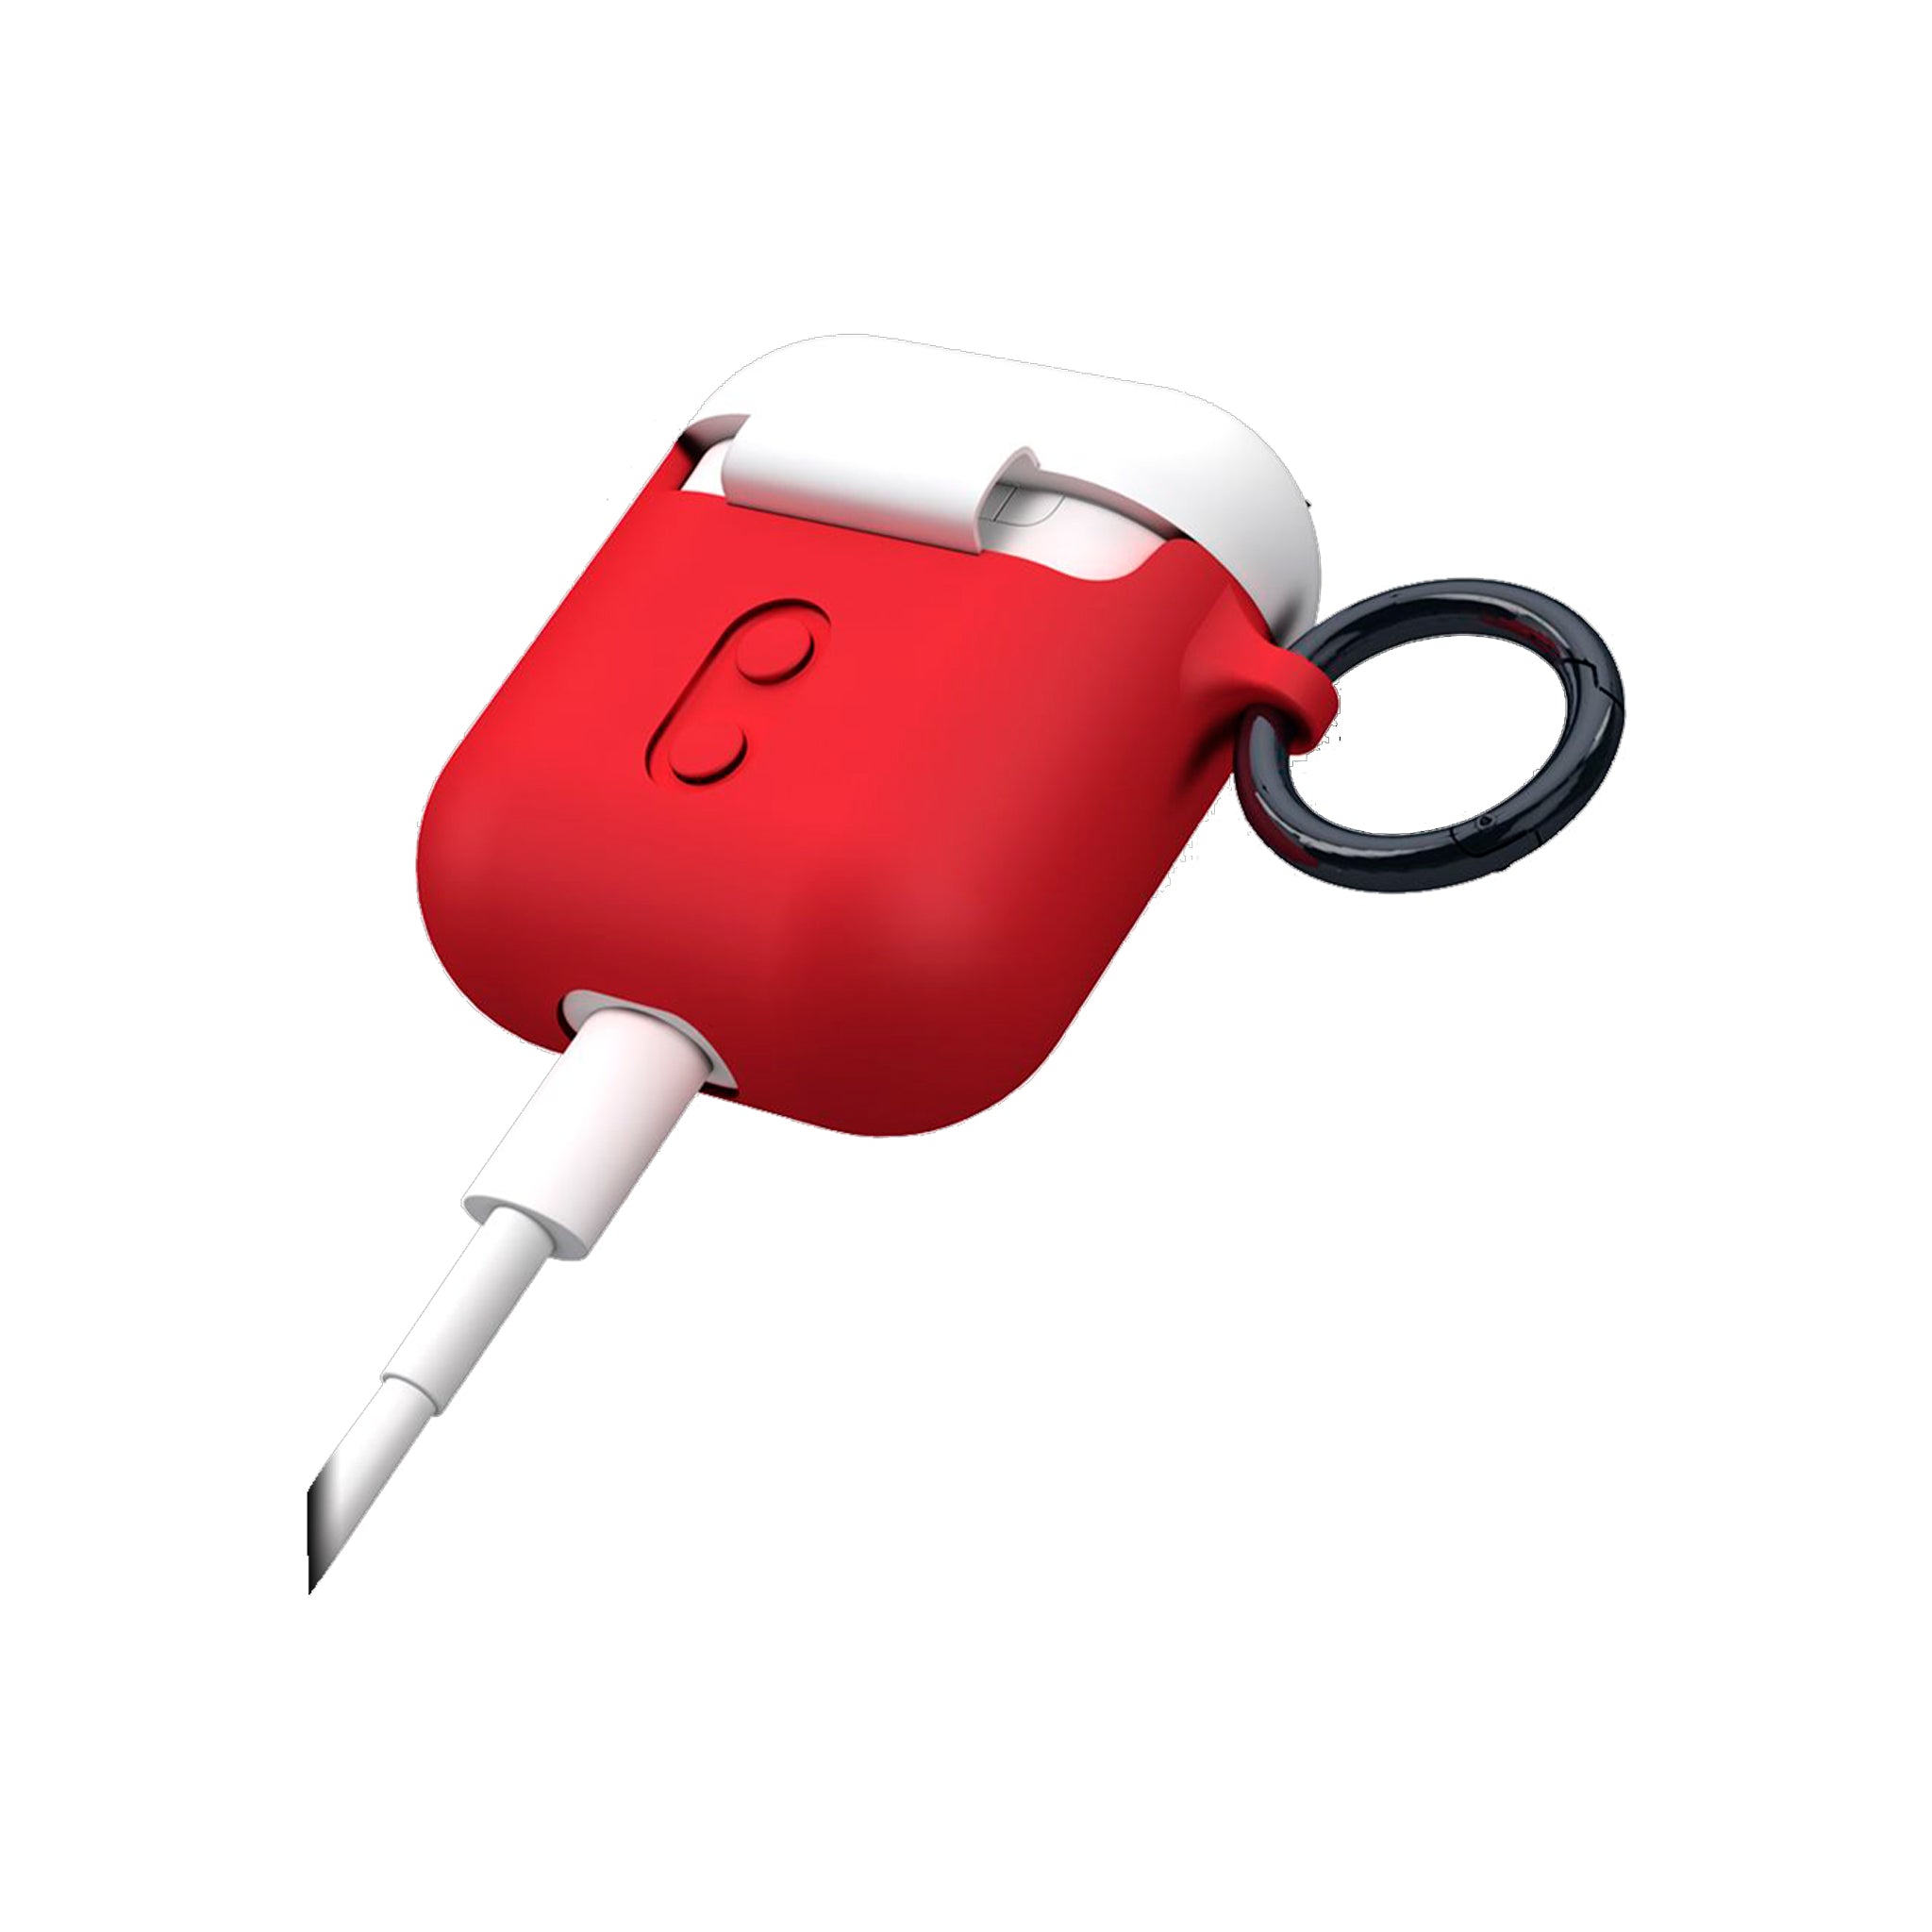 Case-mate - Creaturepods Case For Apple Airpods - Edge The Bad Boy